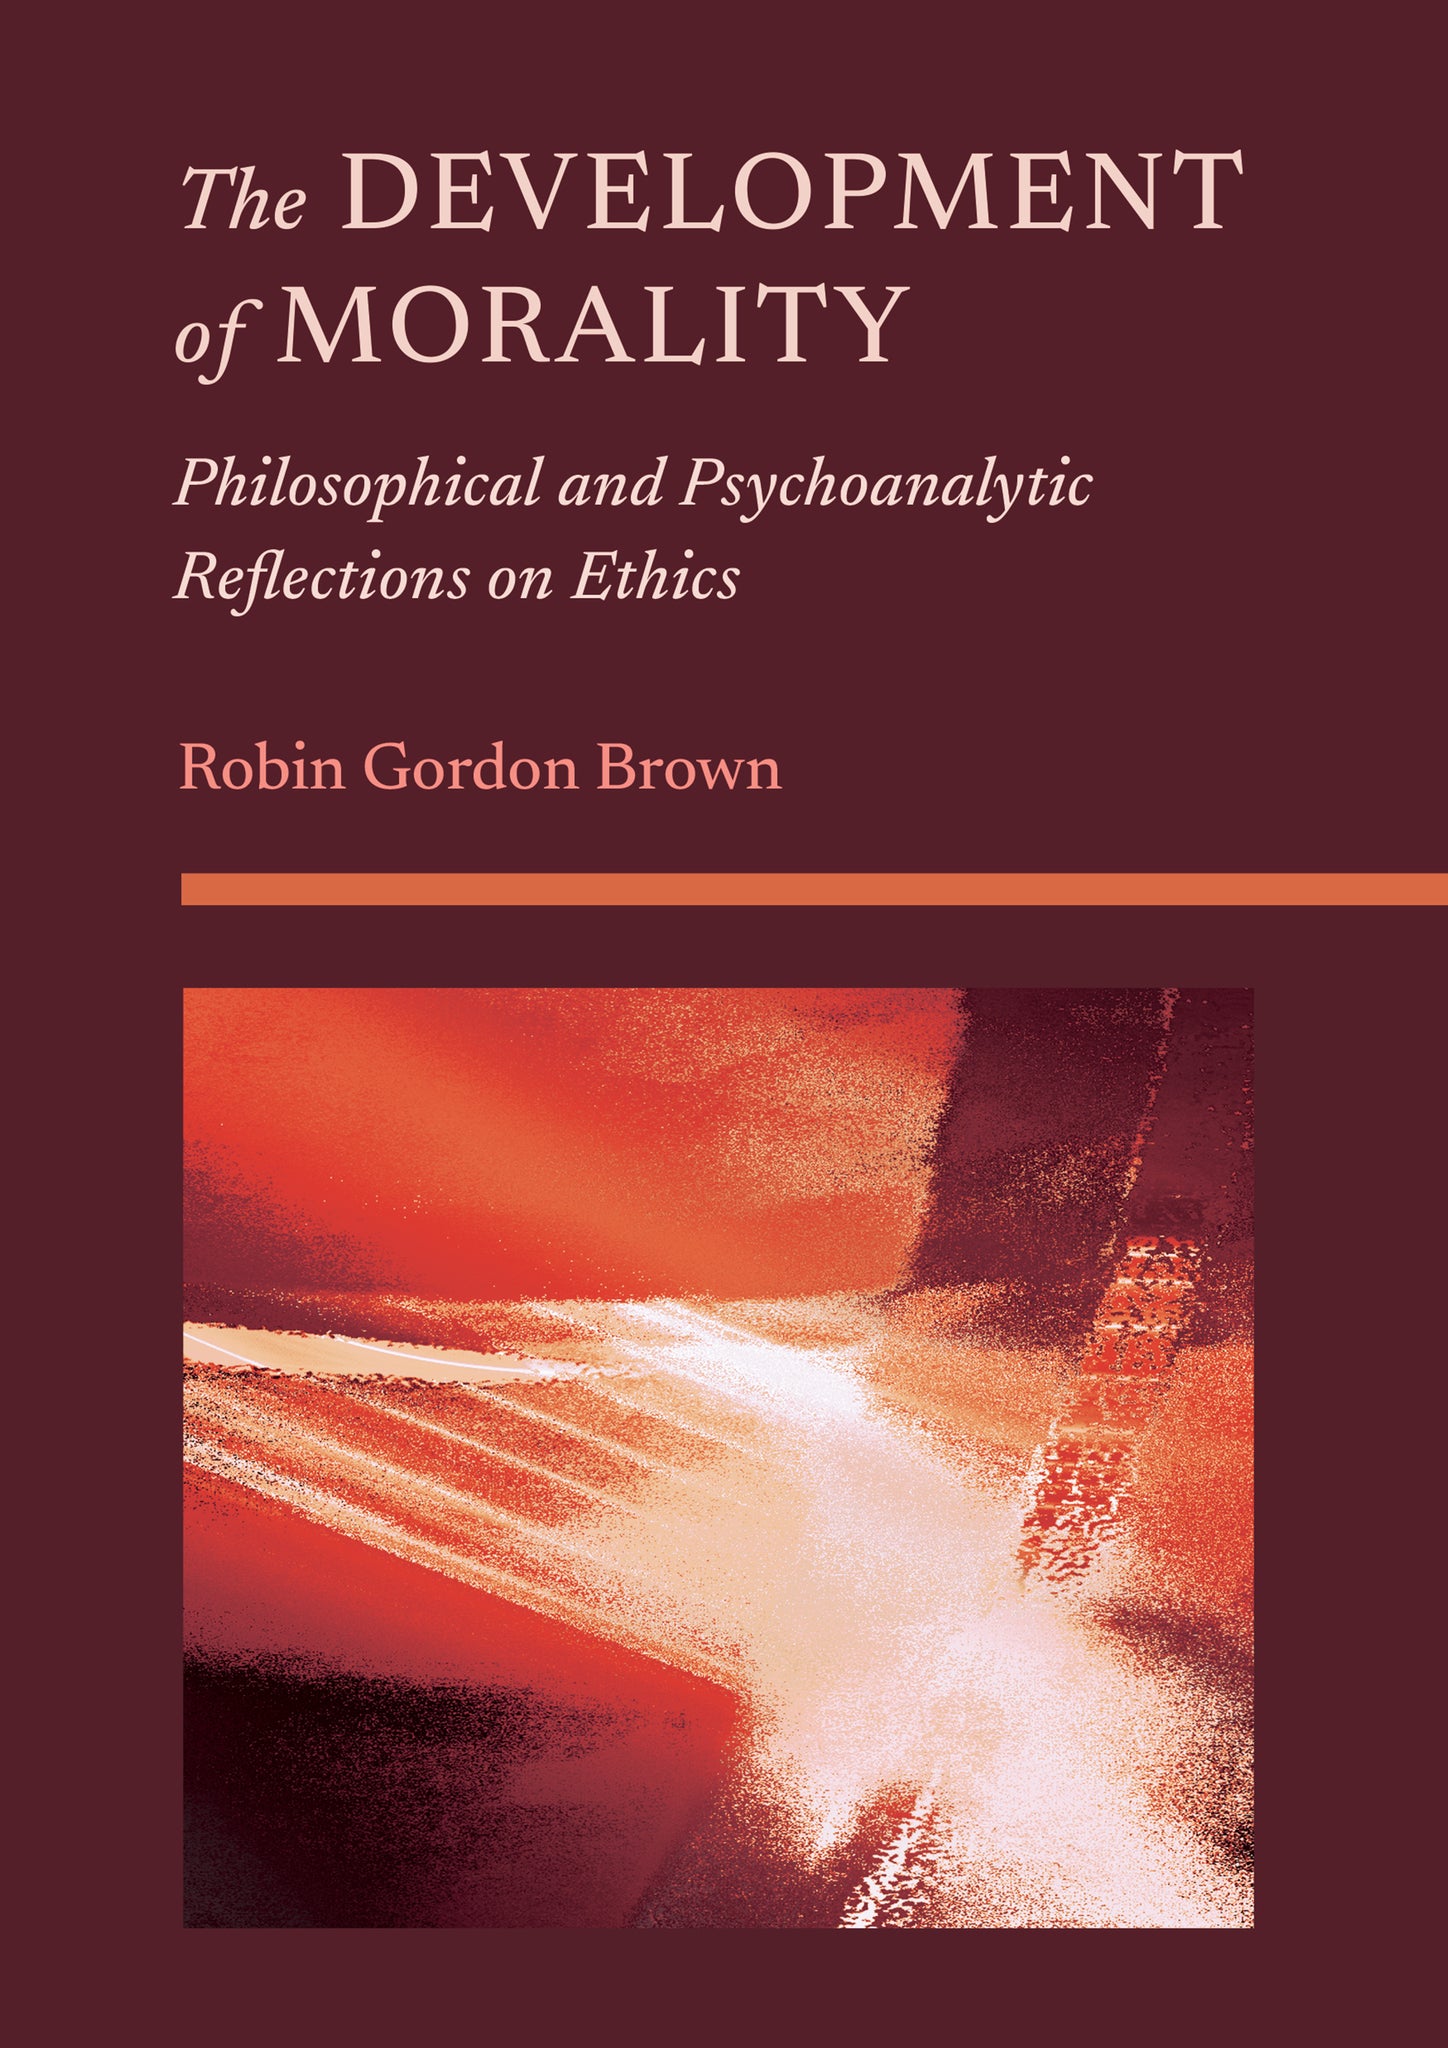 The Development of Morality: Philosophical and Psychoanalytic Reflections on Ethics